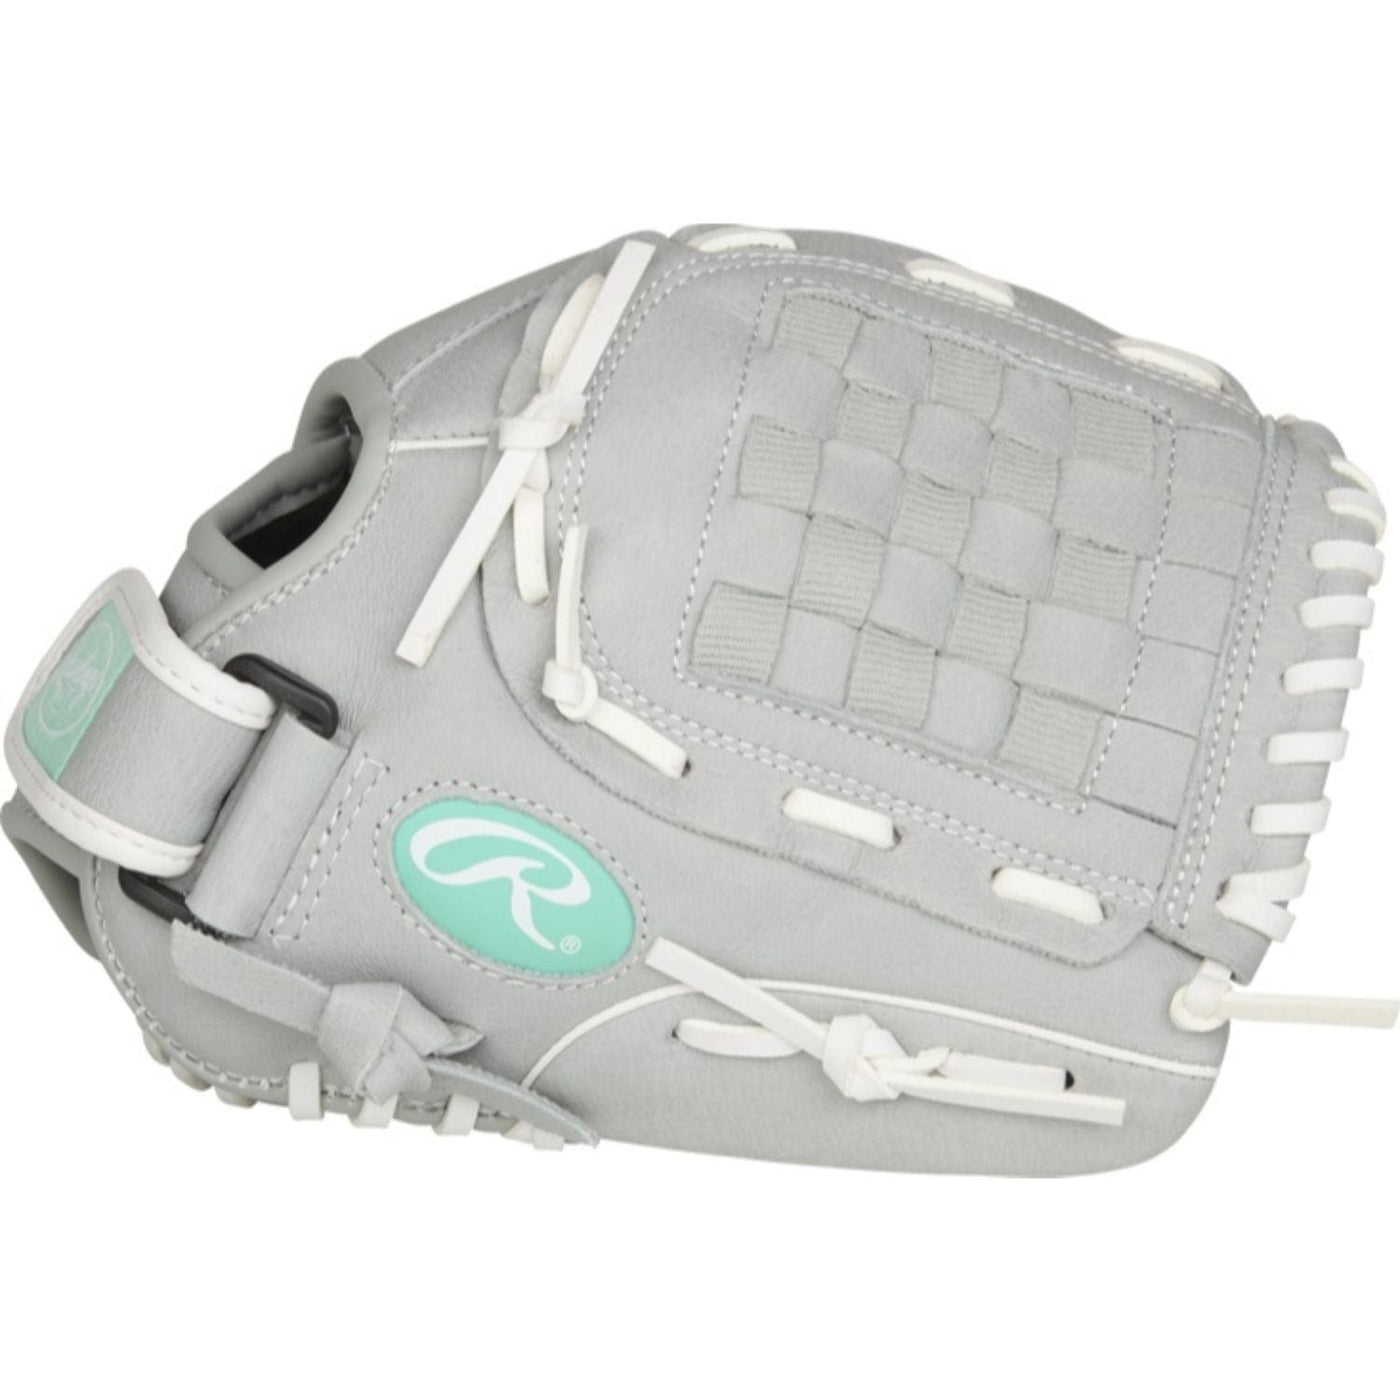 Rawlings Rawlings Sure Catch in Youth Infield Pitchers Glove Left hand / 11" Sports